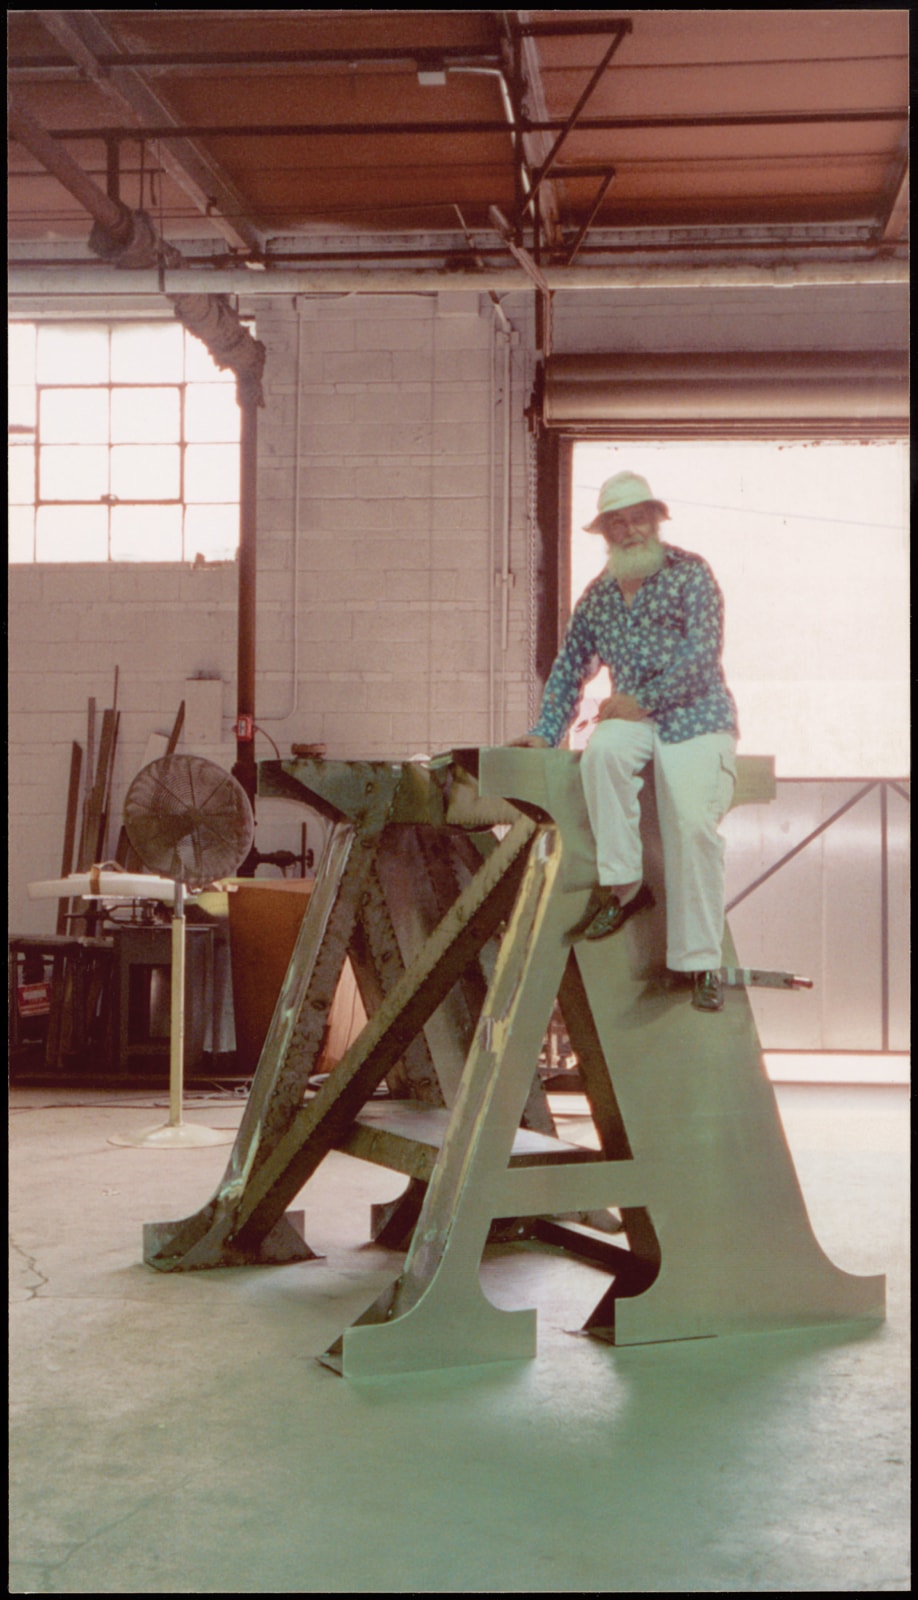 Indiana with a section of The Indiana Obelisk (2002), photographed while the sculpture was being fabricated at Milgo/Bufkin in Brooklyn, New York, 2001